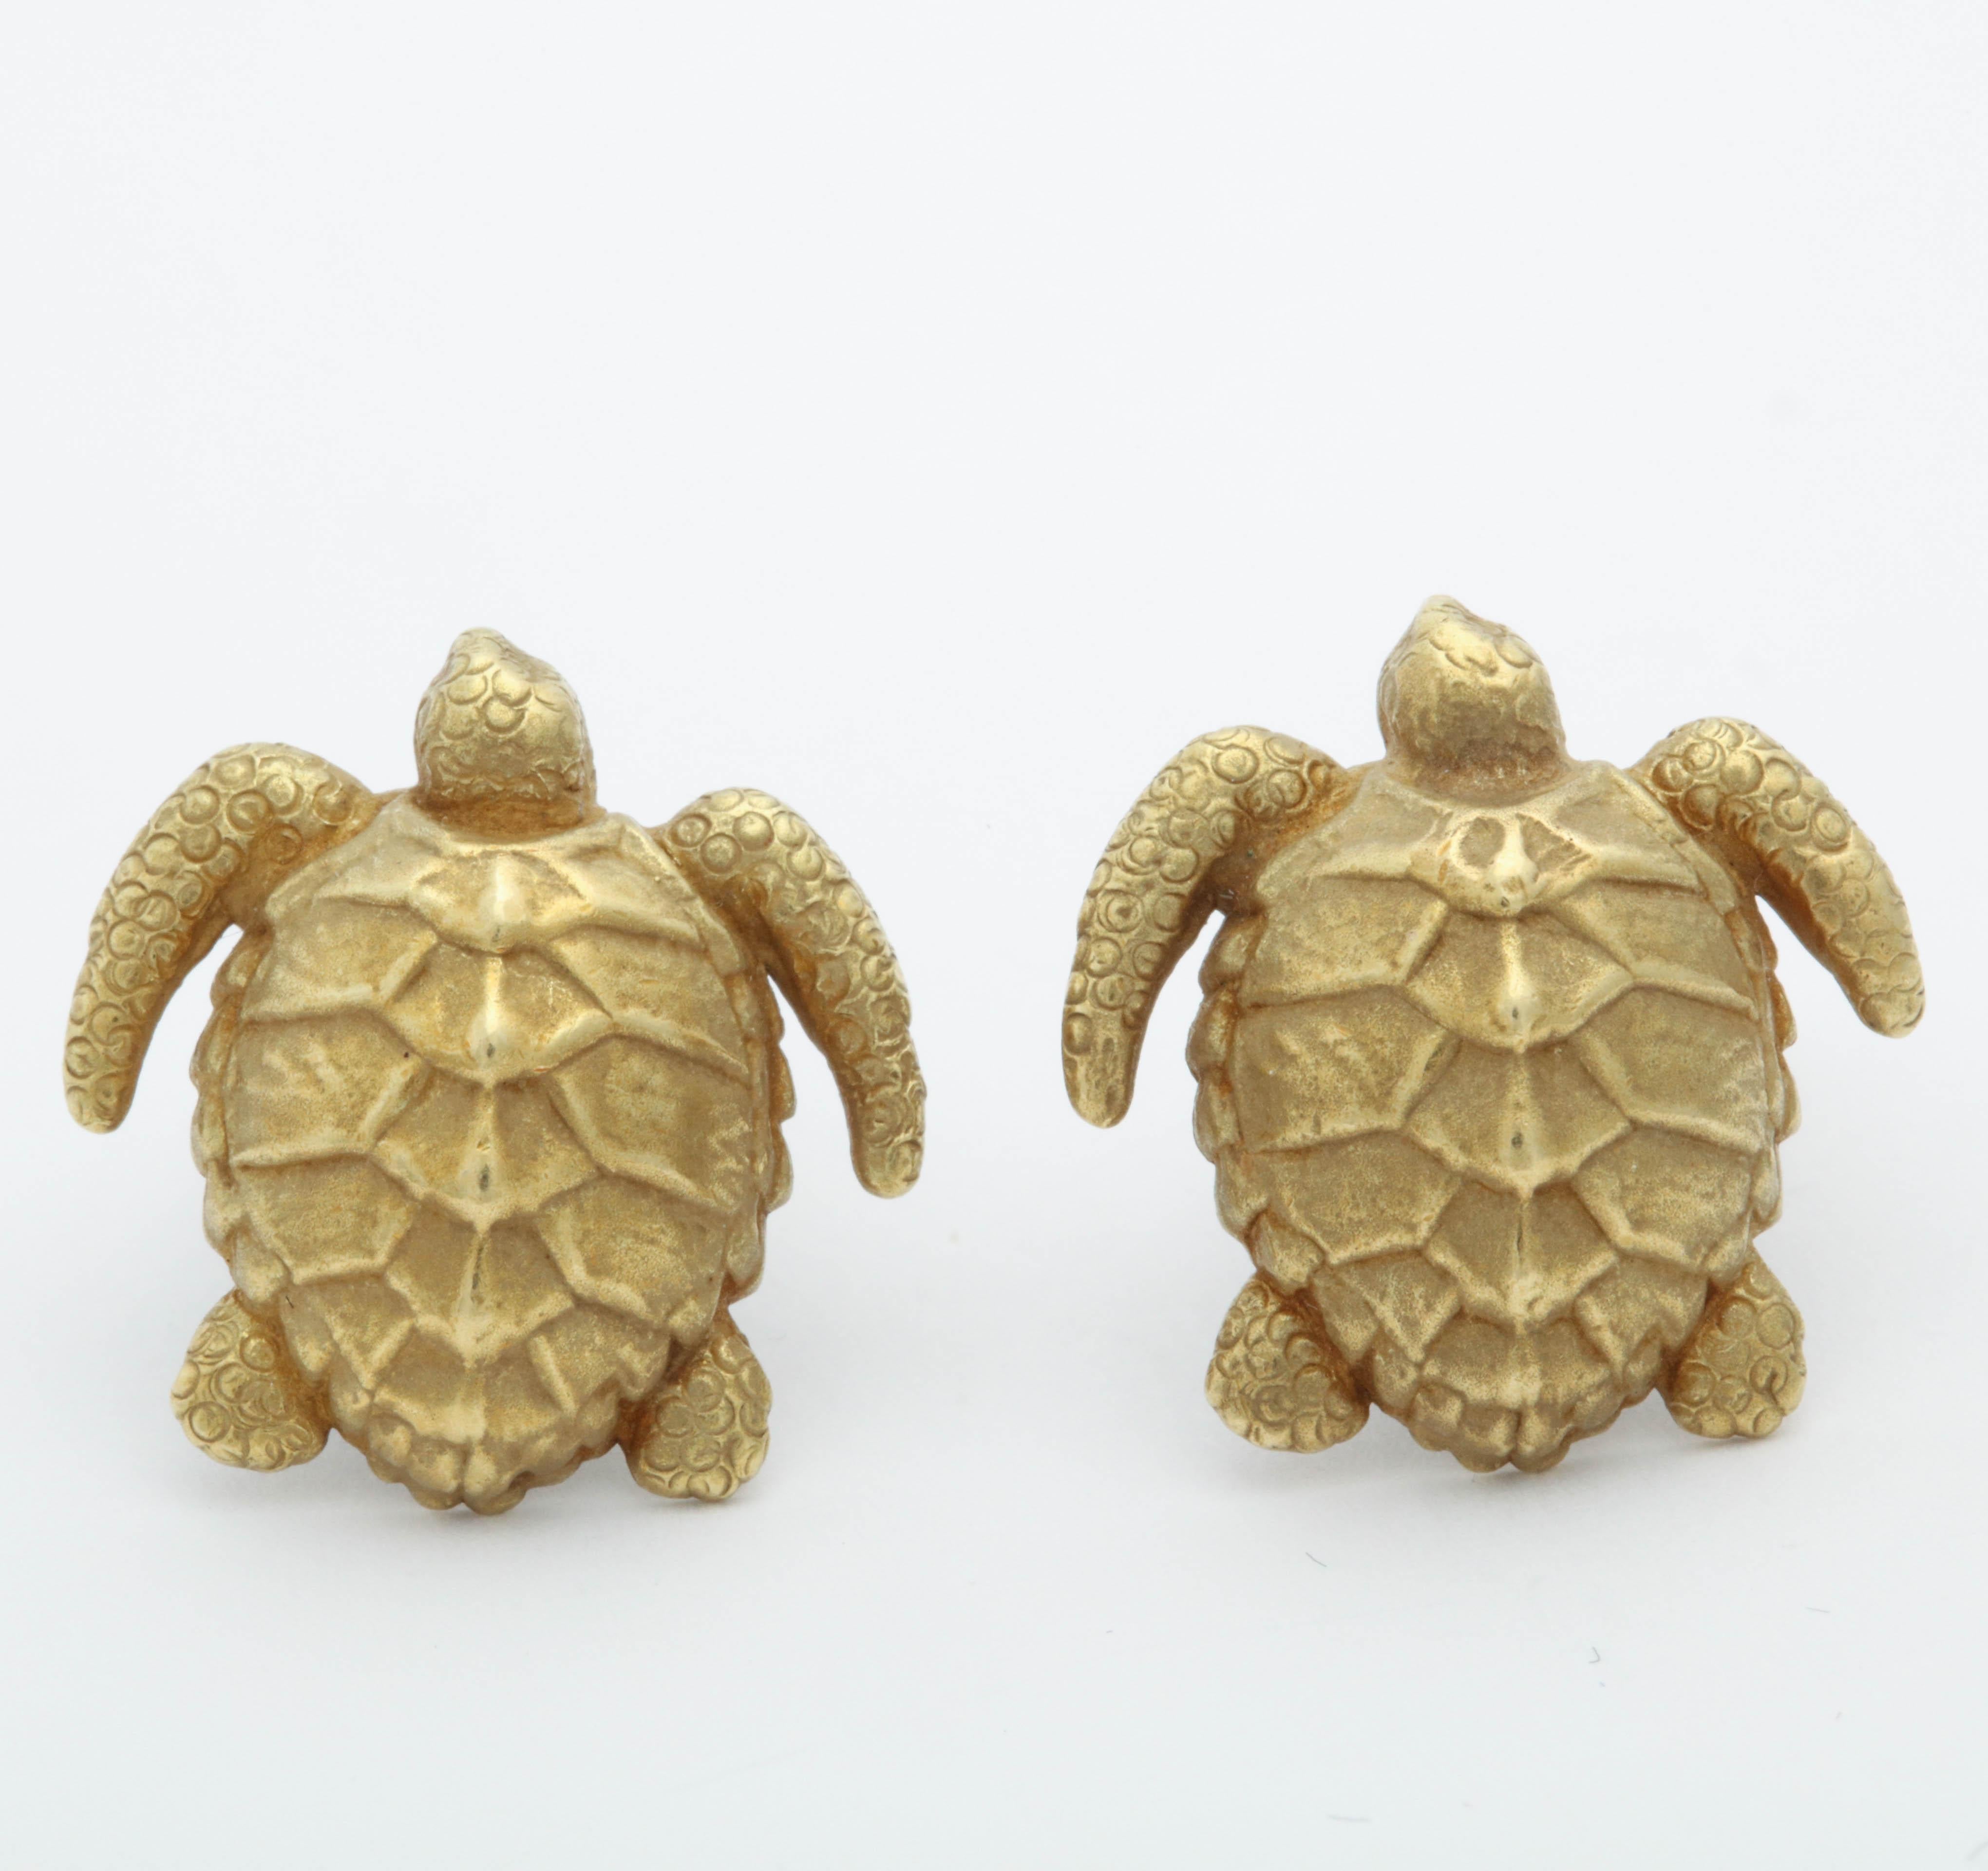 One Pair Of 18kt Green Gold Figural And Textured Gold Turtle Cufflinks Designed By Barry Kiselstein-Cord In The 1980's In The United states Of America. Barry Kiselstein-Cord Jewelry Is Highly Collectible Since He Closed His Stores. A Very Rare Find.